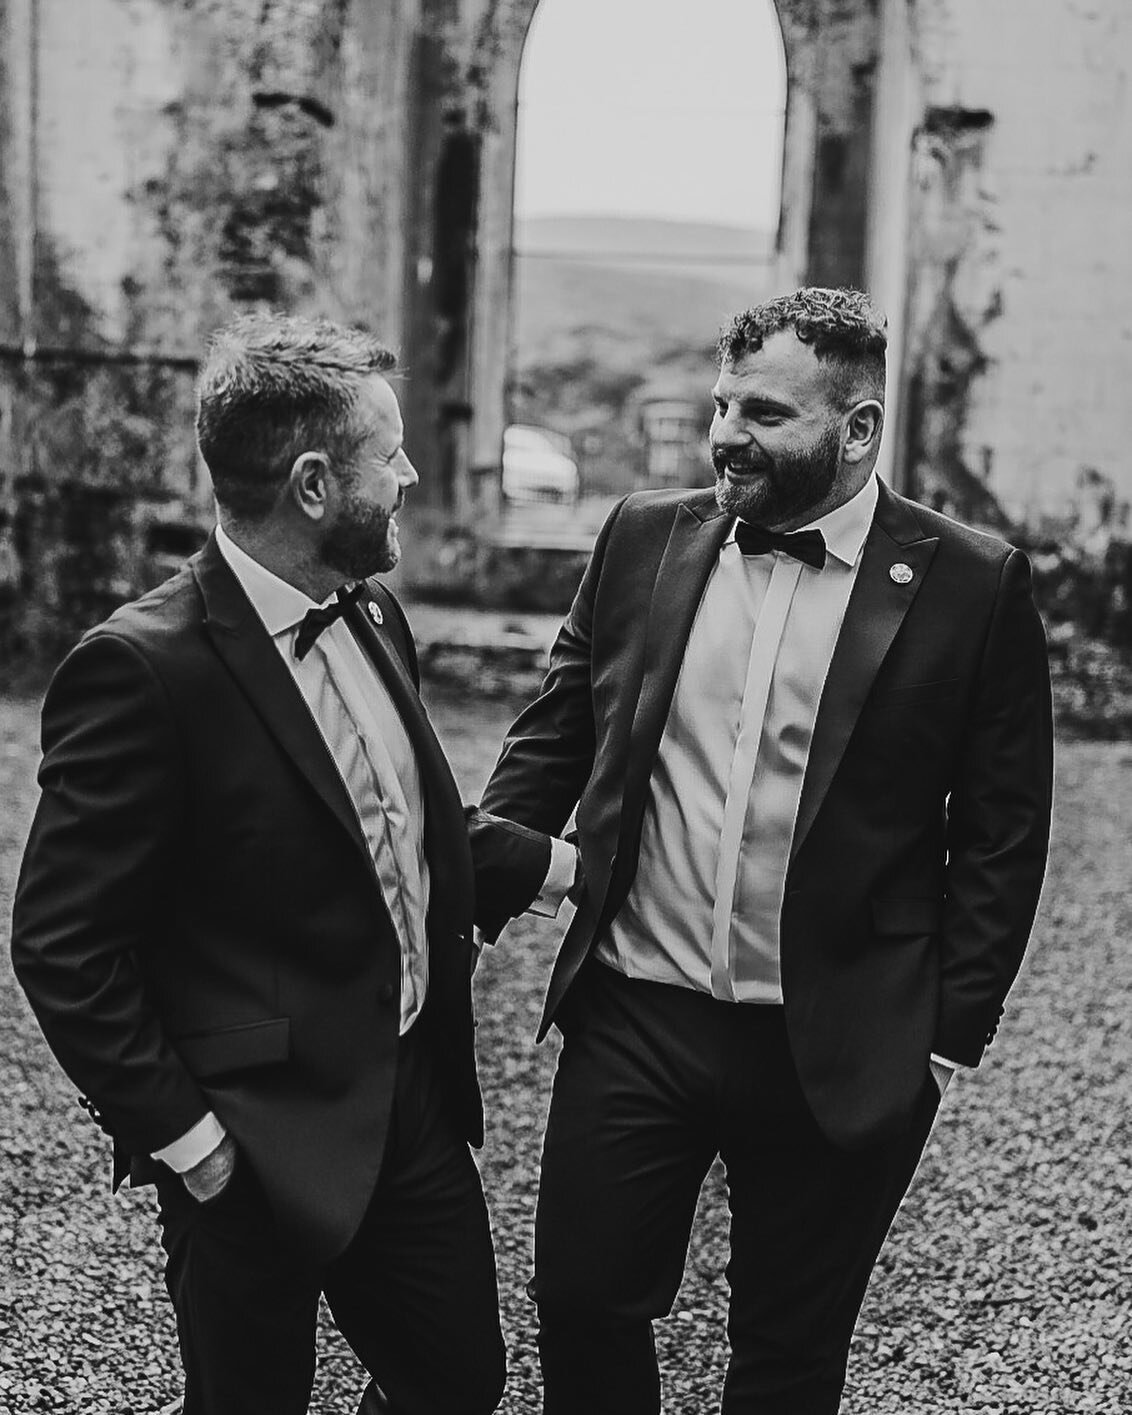 Im currently deep in the editing cave with the wedding images of these two absolute gentlemen. An incredible day was had in Gweedore a couple of weeks ago. N&amp;J 👏 🙏🙌
.
.
.

#belfastweddingphotographer #niweddingphotographer #niweddings #ireland